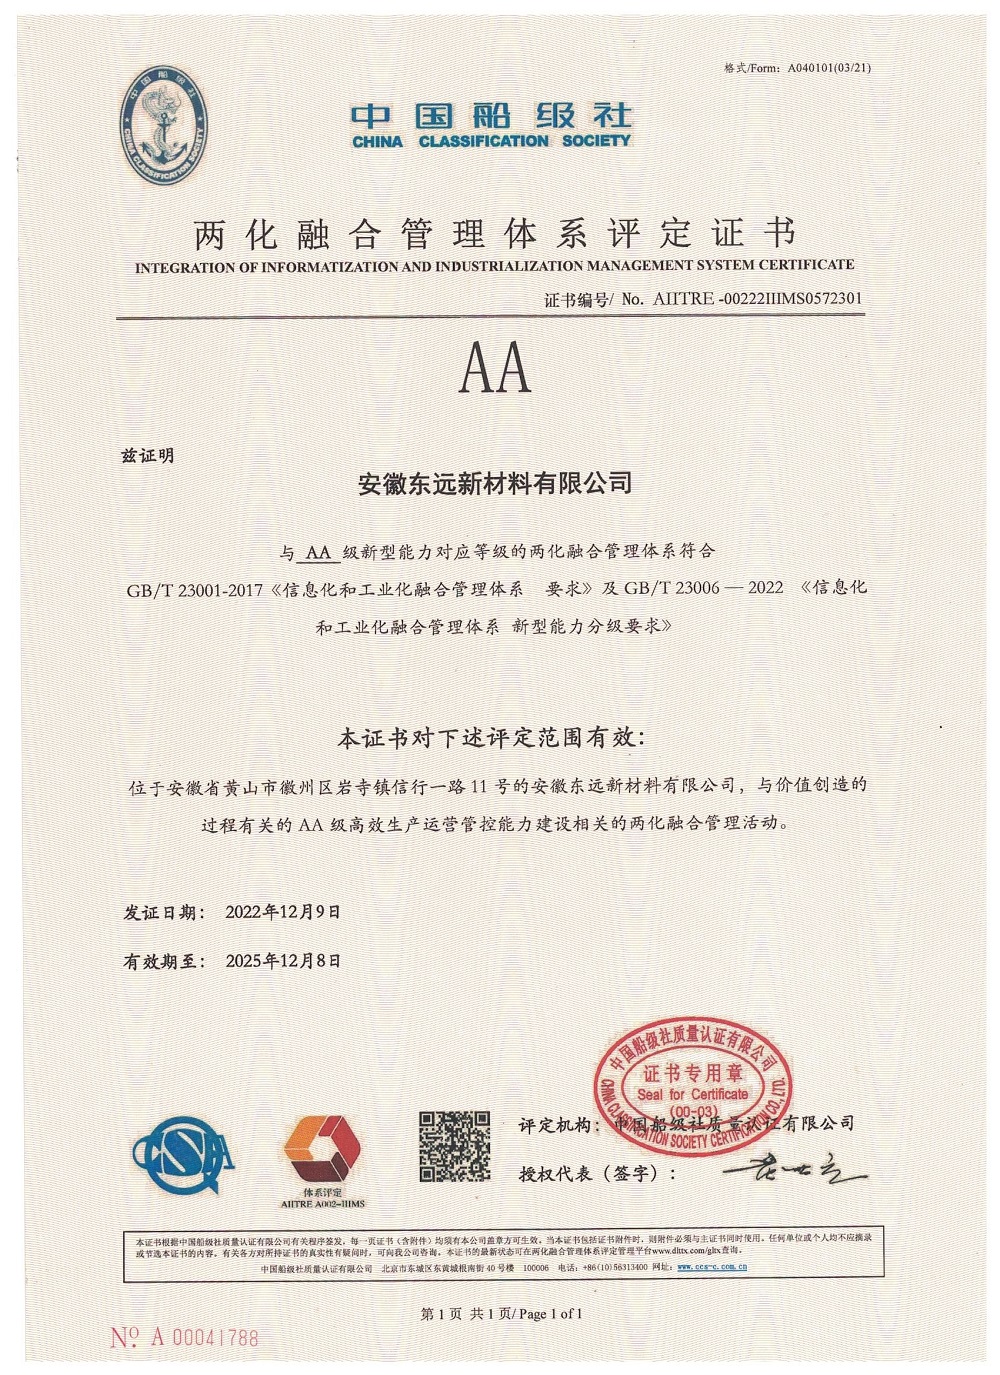 PolyCore Advanced Material Co., Ltd. has been rated AA level for the integration of the infor-mation technology and industrialization management system.